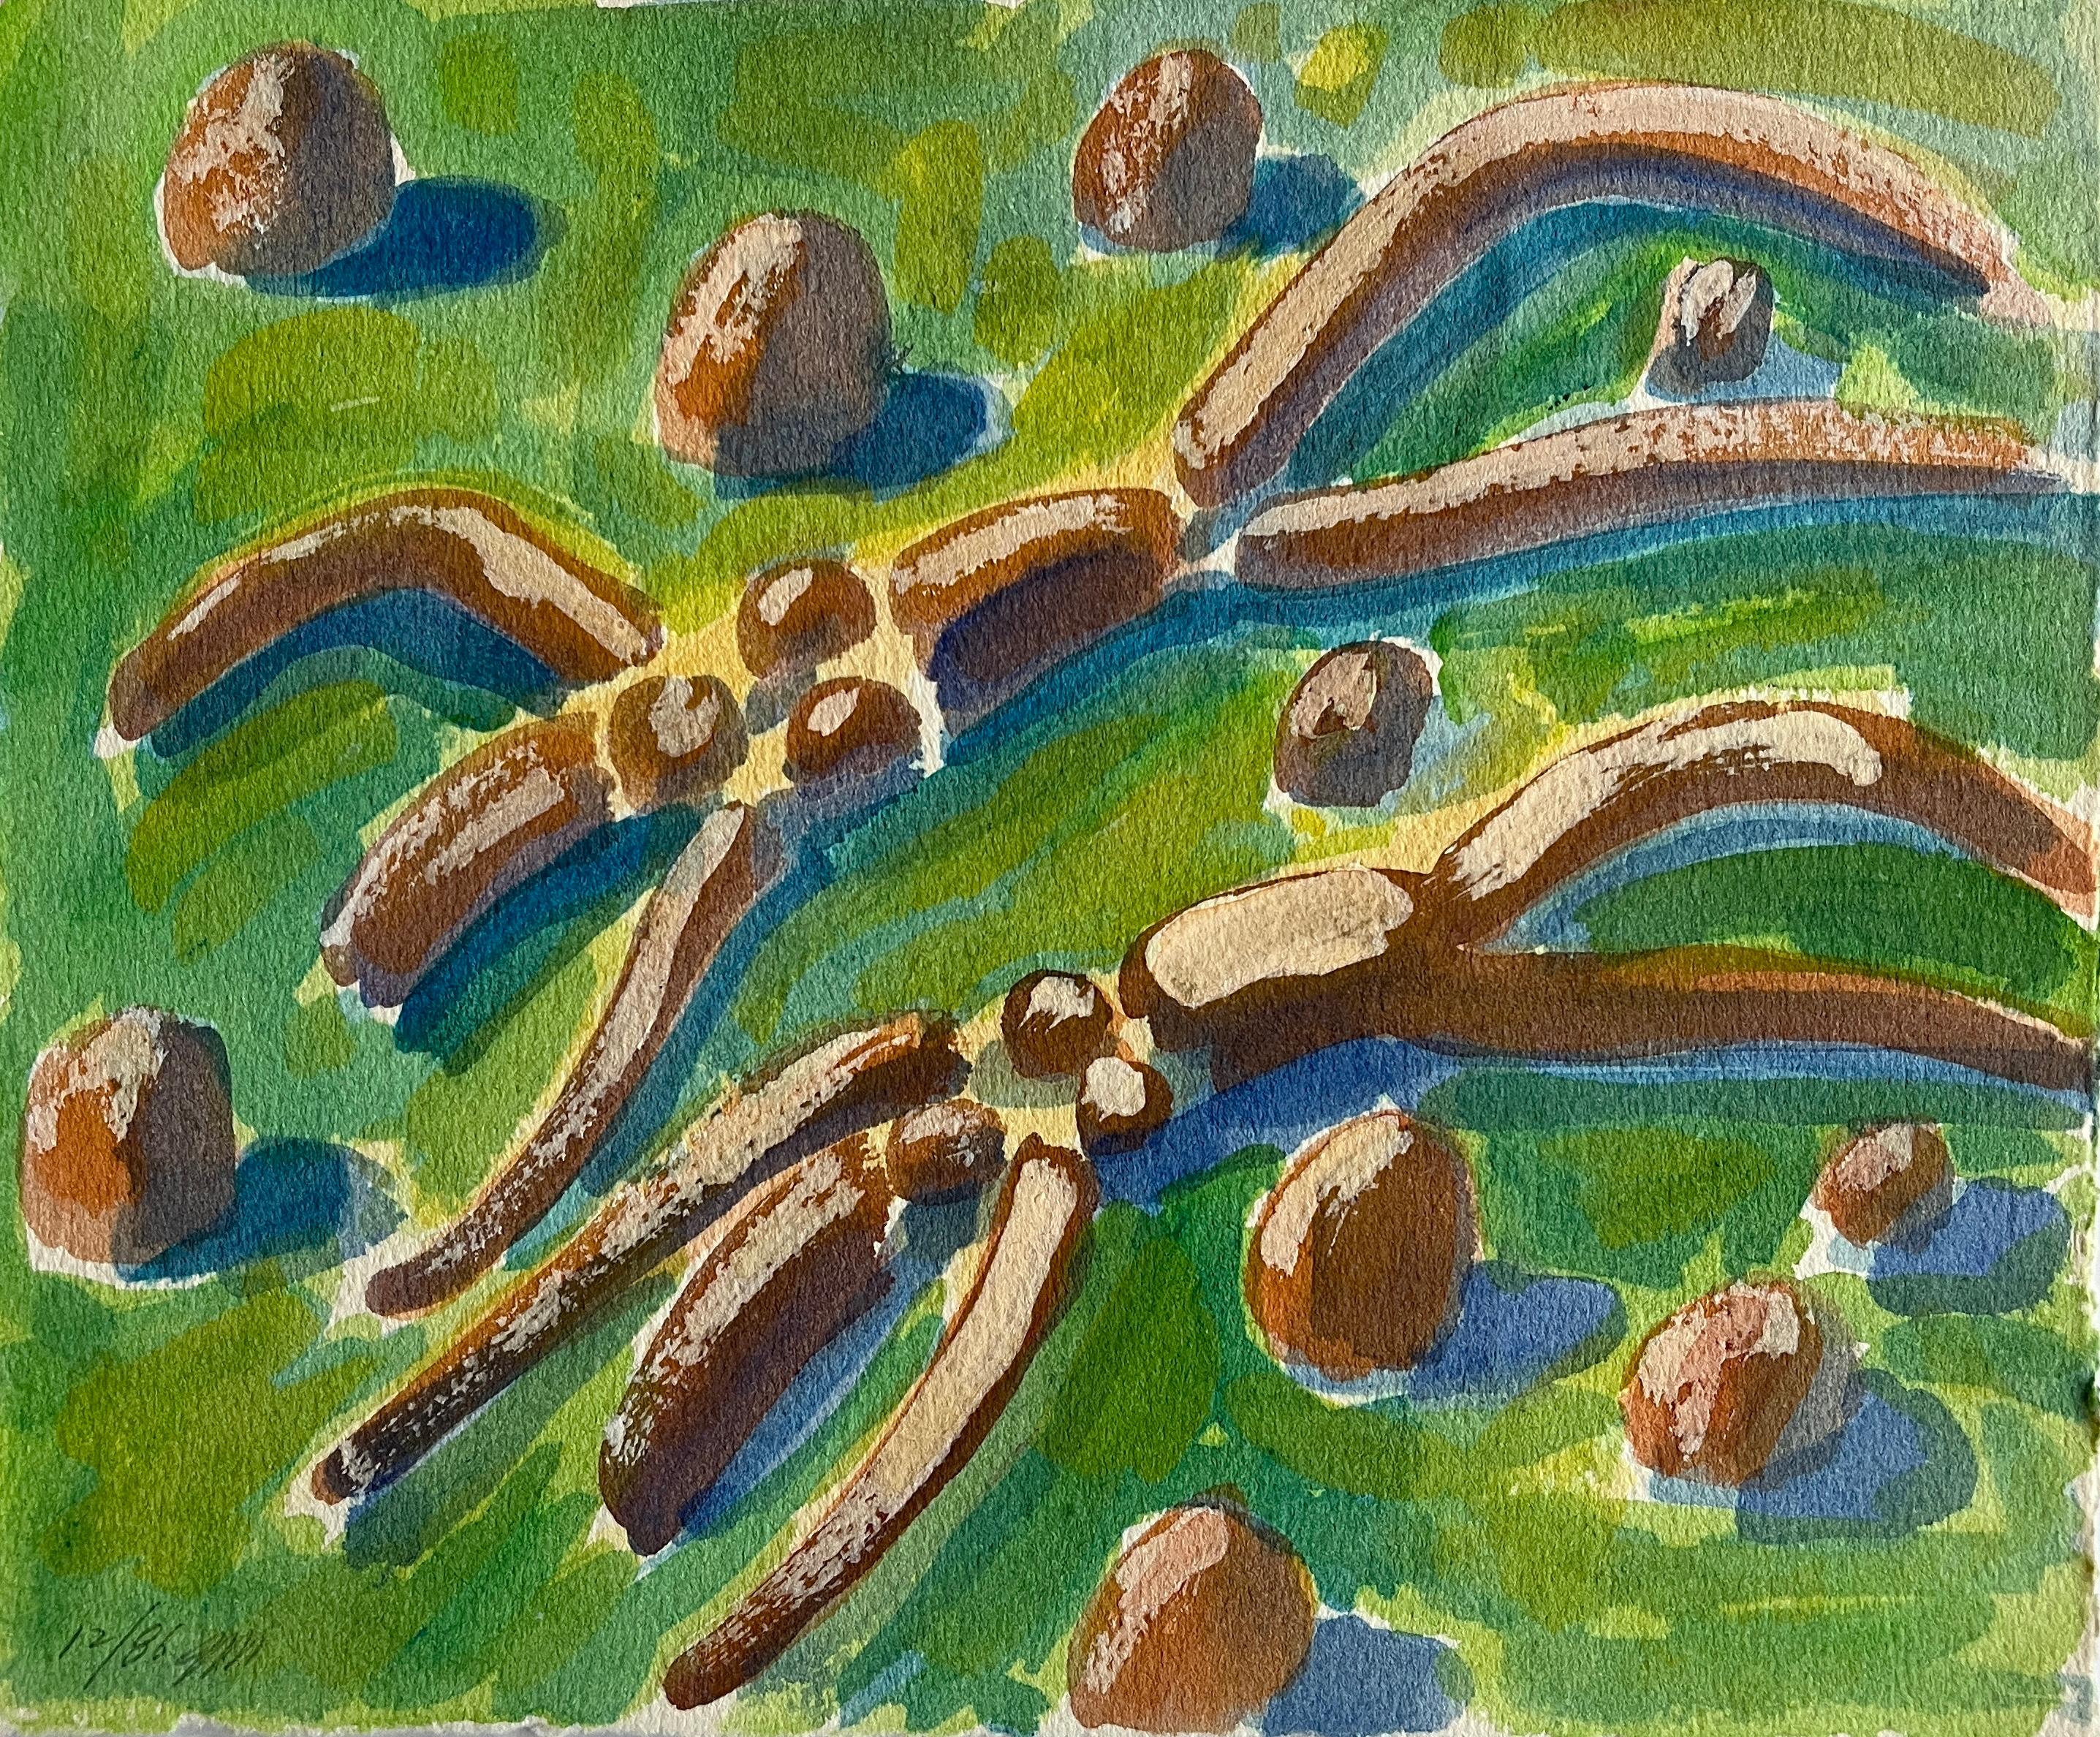 Jack Hooper
"Figures Laying with Shadows"
December 1986
Paint on paper
9.5"x8" unframed
Signed and dated in pencil lower left

In this modernist masterpiece by Jack Hooper, two abstract figures recline on a verdant expanse of grass, their limbs